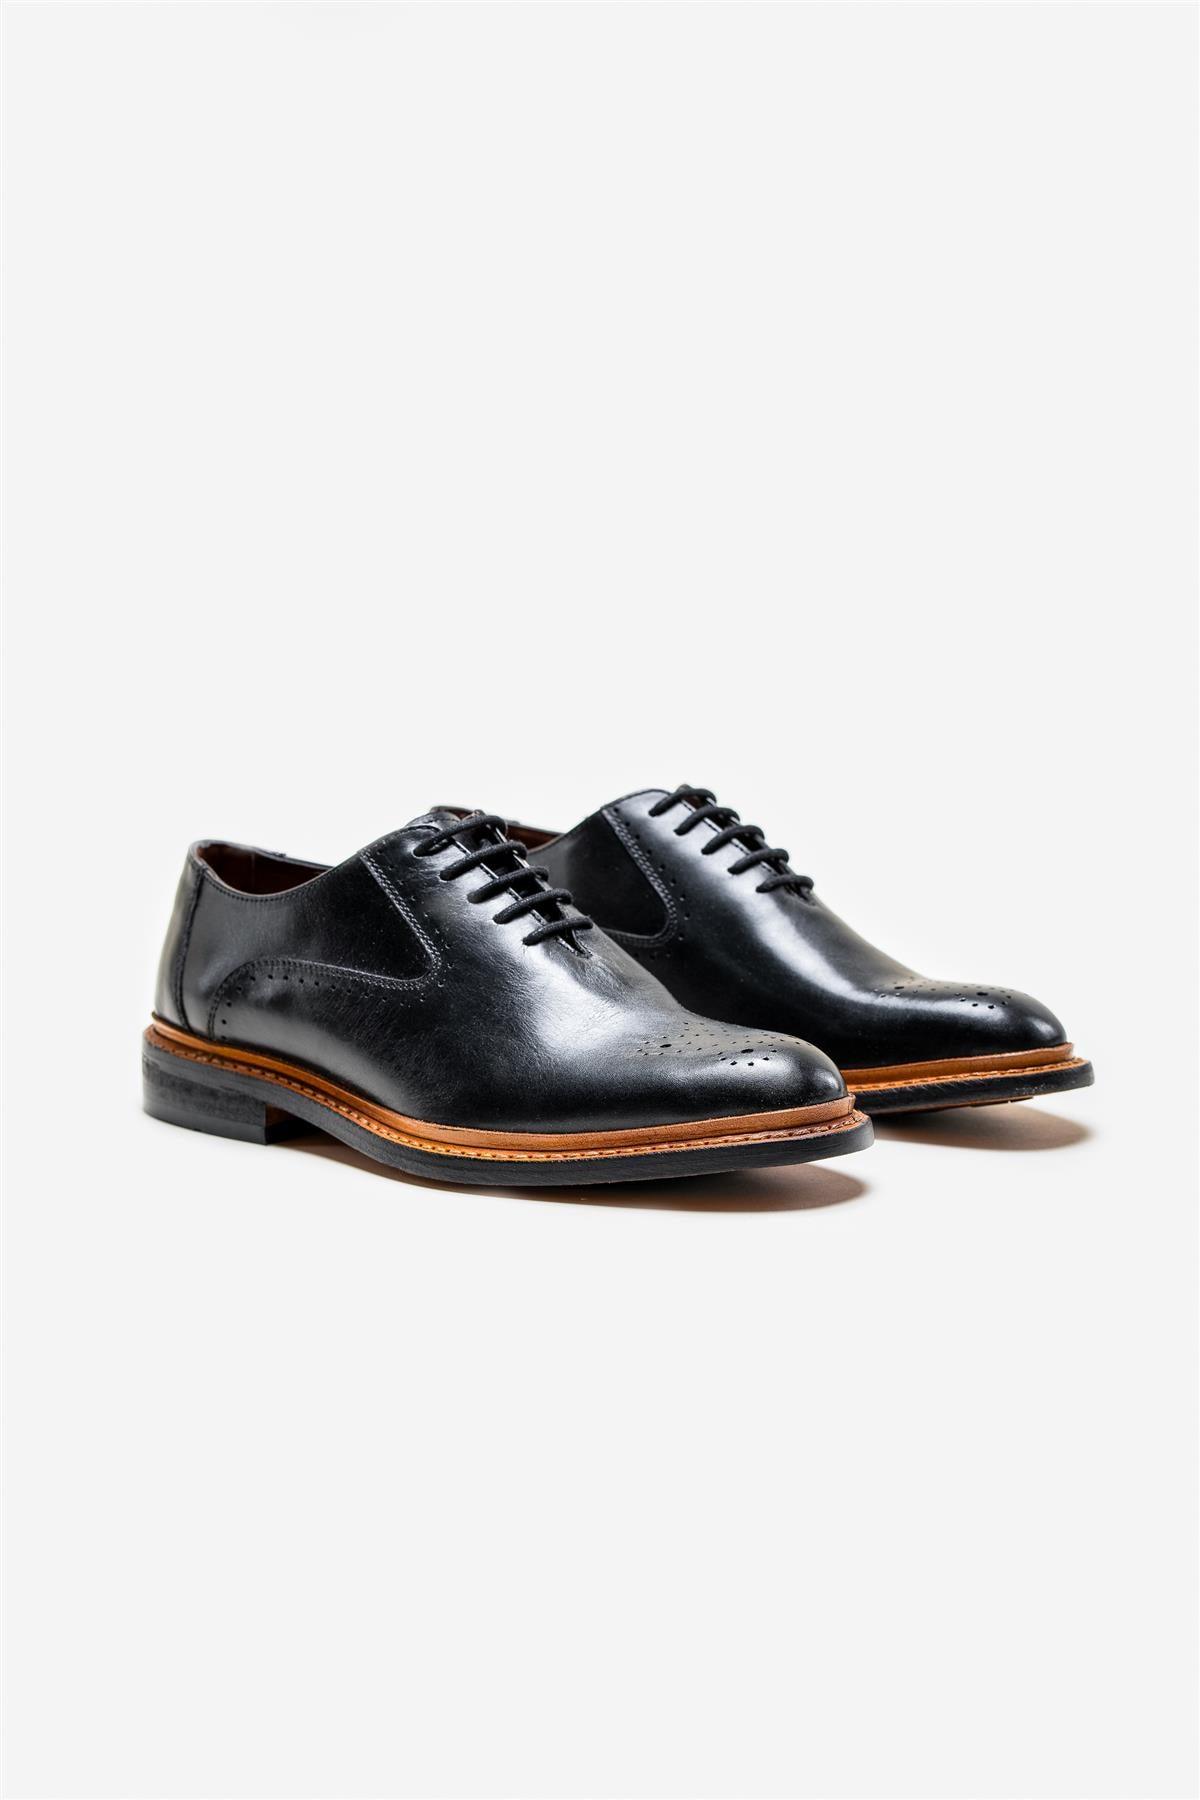 Brentwood black shoes front